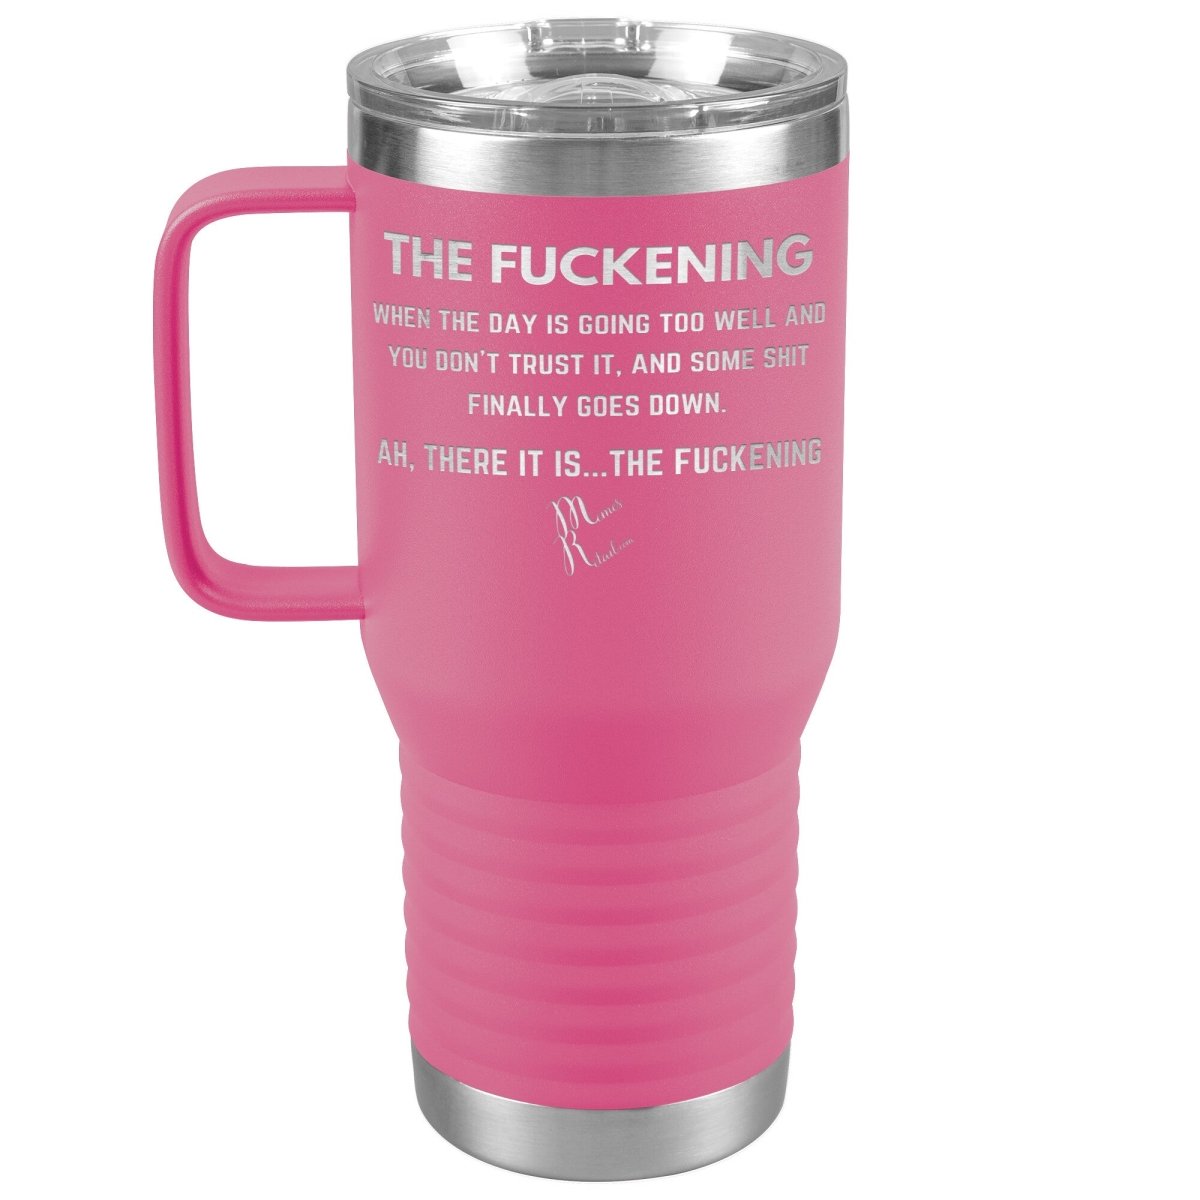 The Fuckening, When you don't trust the day Tumblers, 20oz Travel Tumbler / Pink - MemesRetail.com